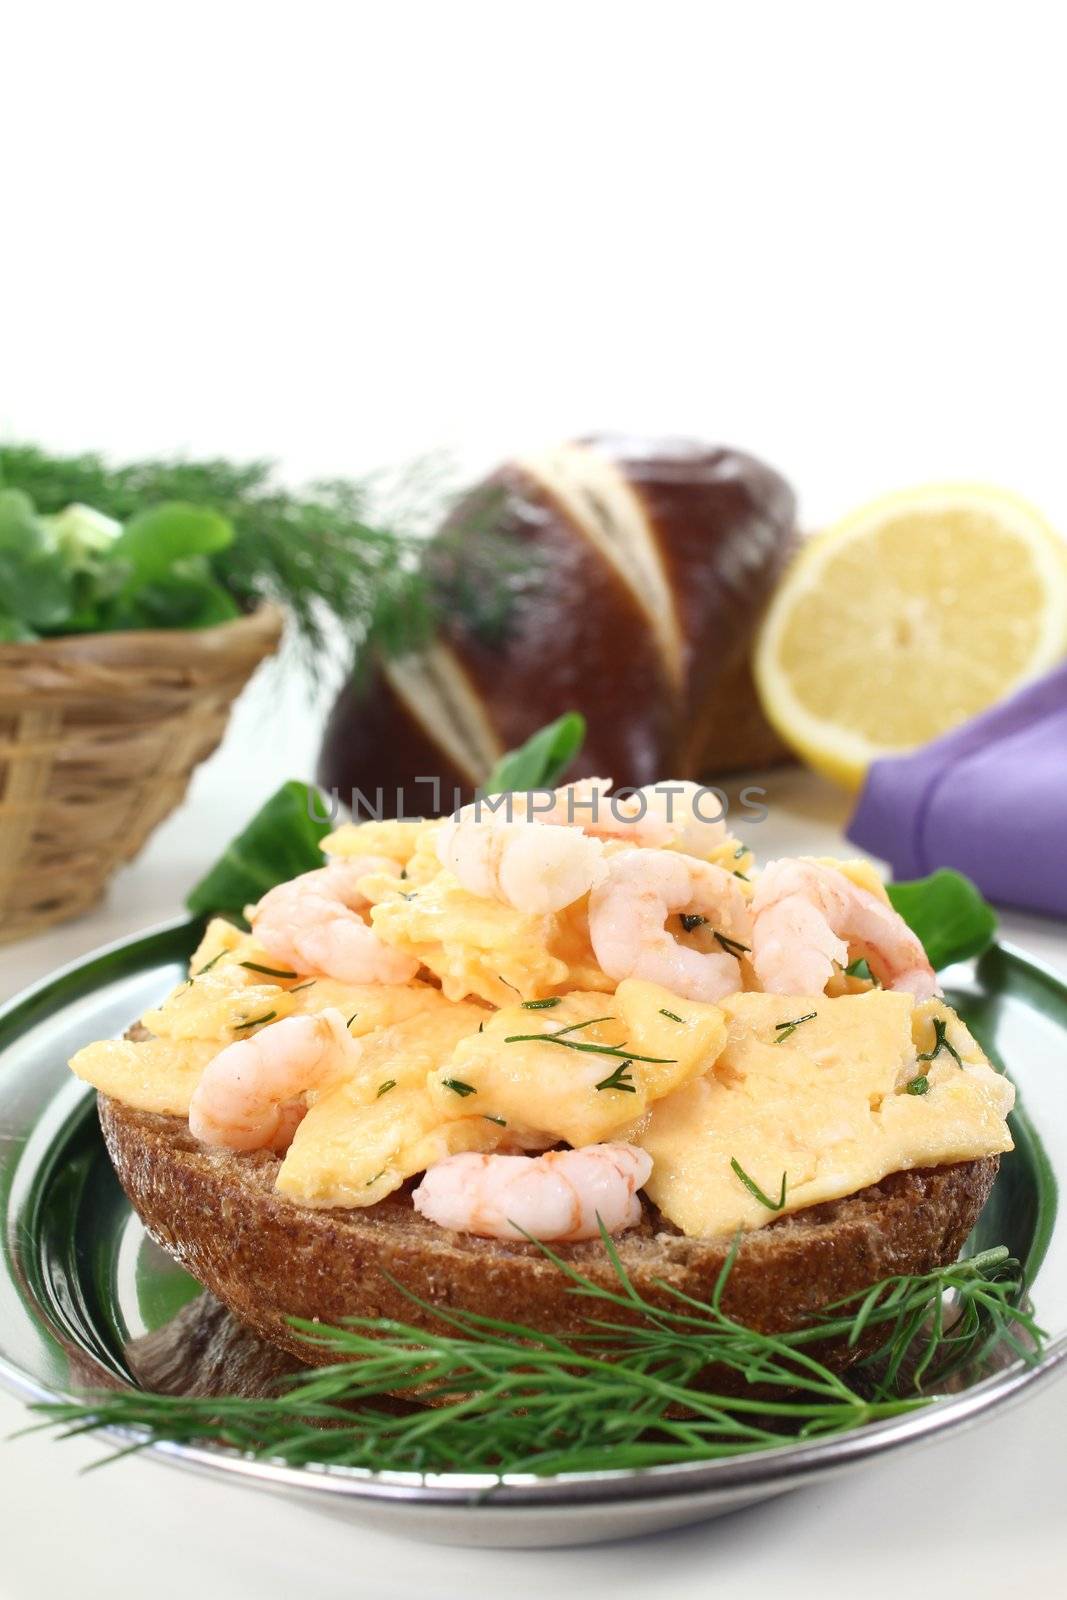 fresh Scrambled eggs on toast with shrimp, dill and corn salad